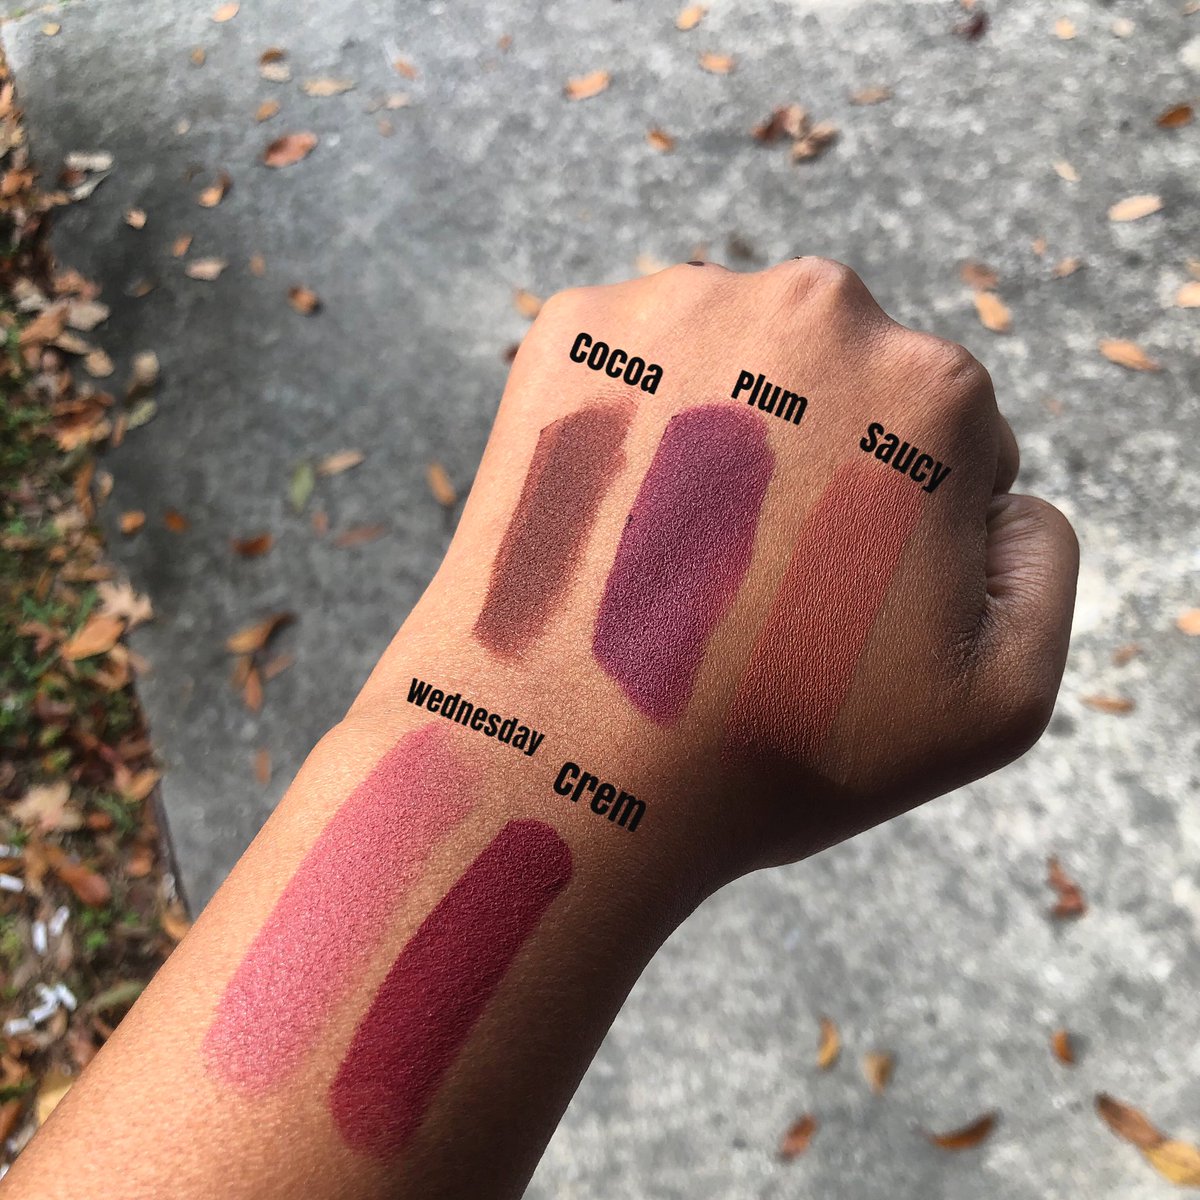 Check out our new velvet lipstick shades for the holidays! #blackbeautybrand #lipstick